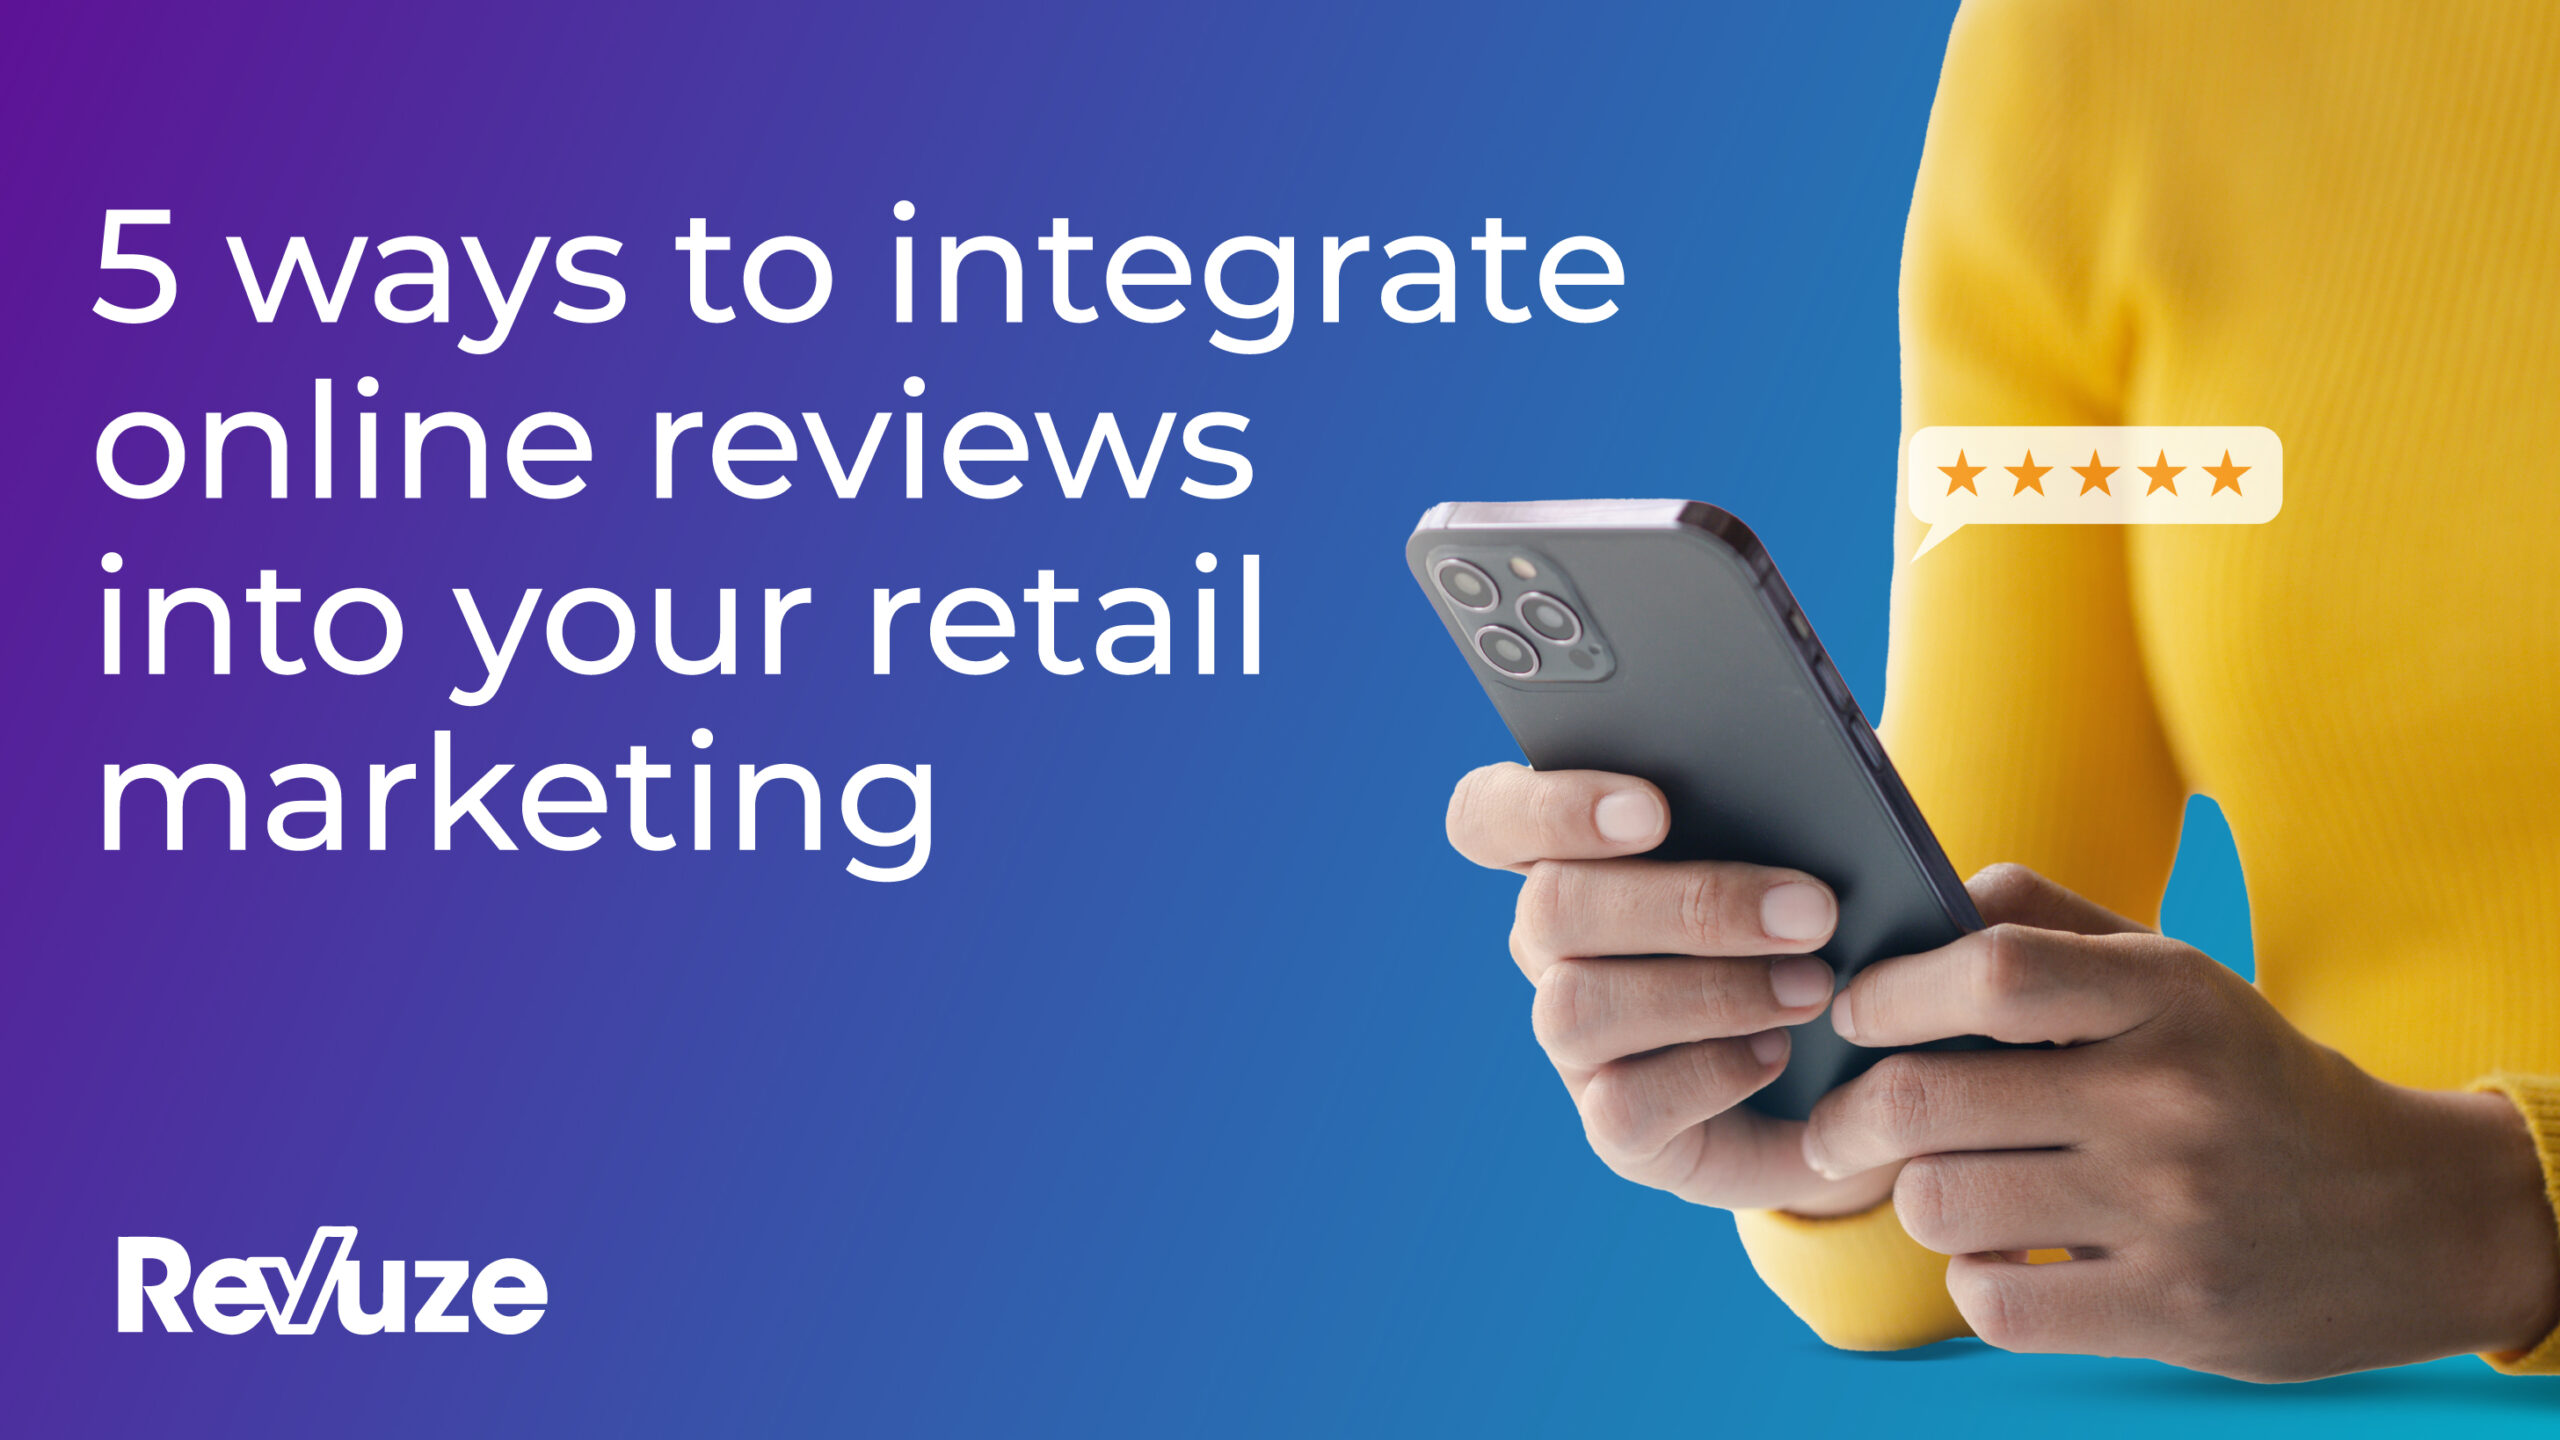 5 ways to integrate online reviews into your retail marketing